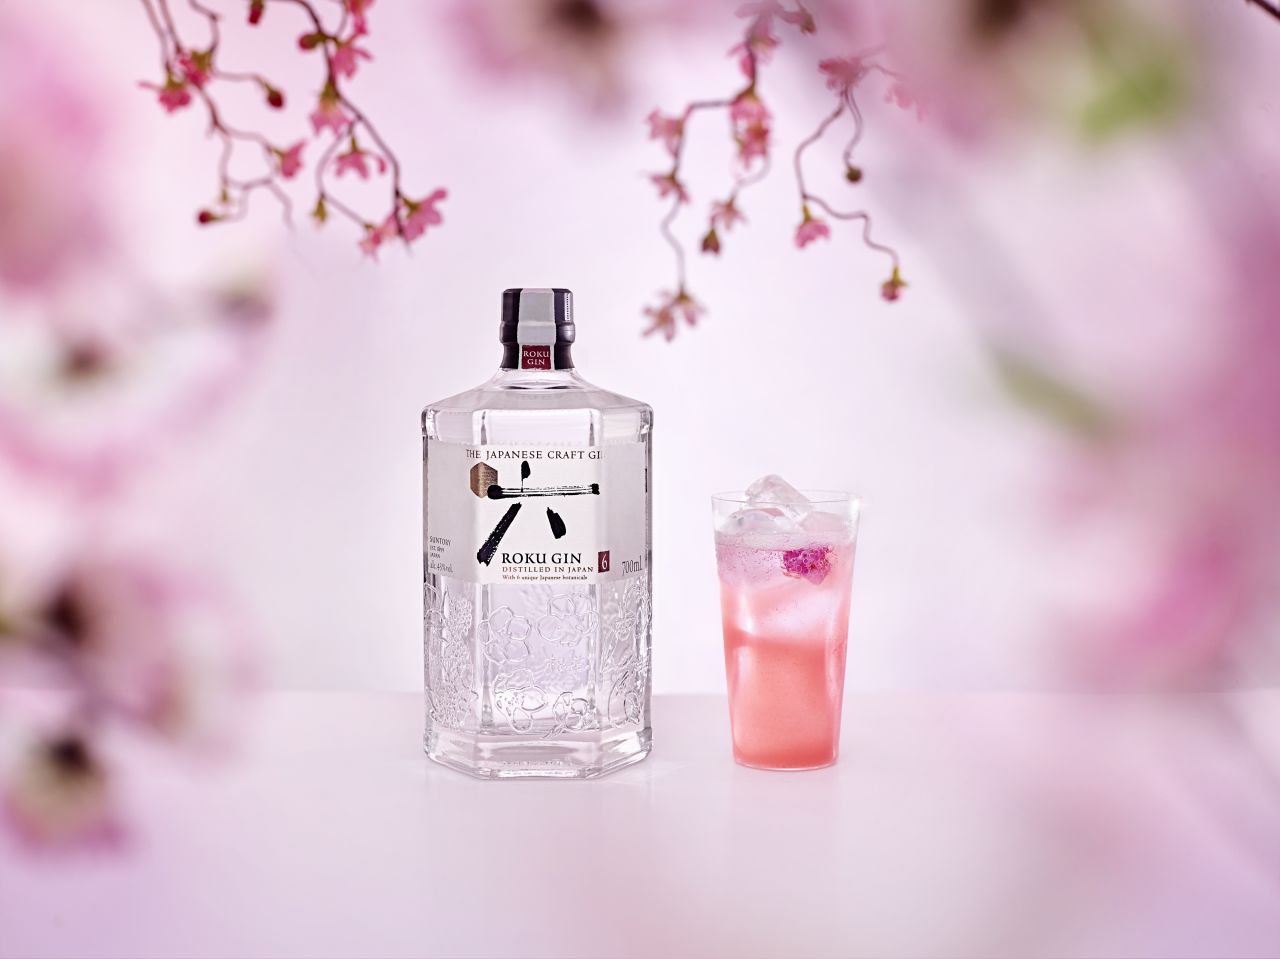 The craft gin market in Japan has been growing since whisky giant Suntory launched its first craft gin, <a href="https://rokugin.suntory.com/en/gb/" target="_blank" target="_blank">Roku</a>, in 2017. Global sales volumes for Roku — which uses traditional Japanese ingredients including sakura flower, green tea, sansho pepper, and yuzu peel — increased more than tenfold from 2017 to 2019, according to Suntory. 